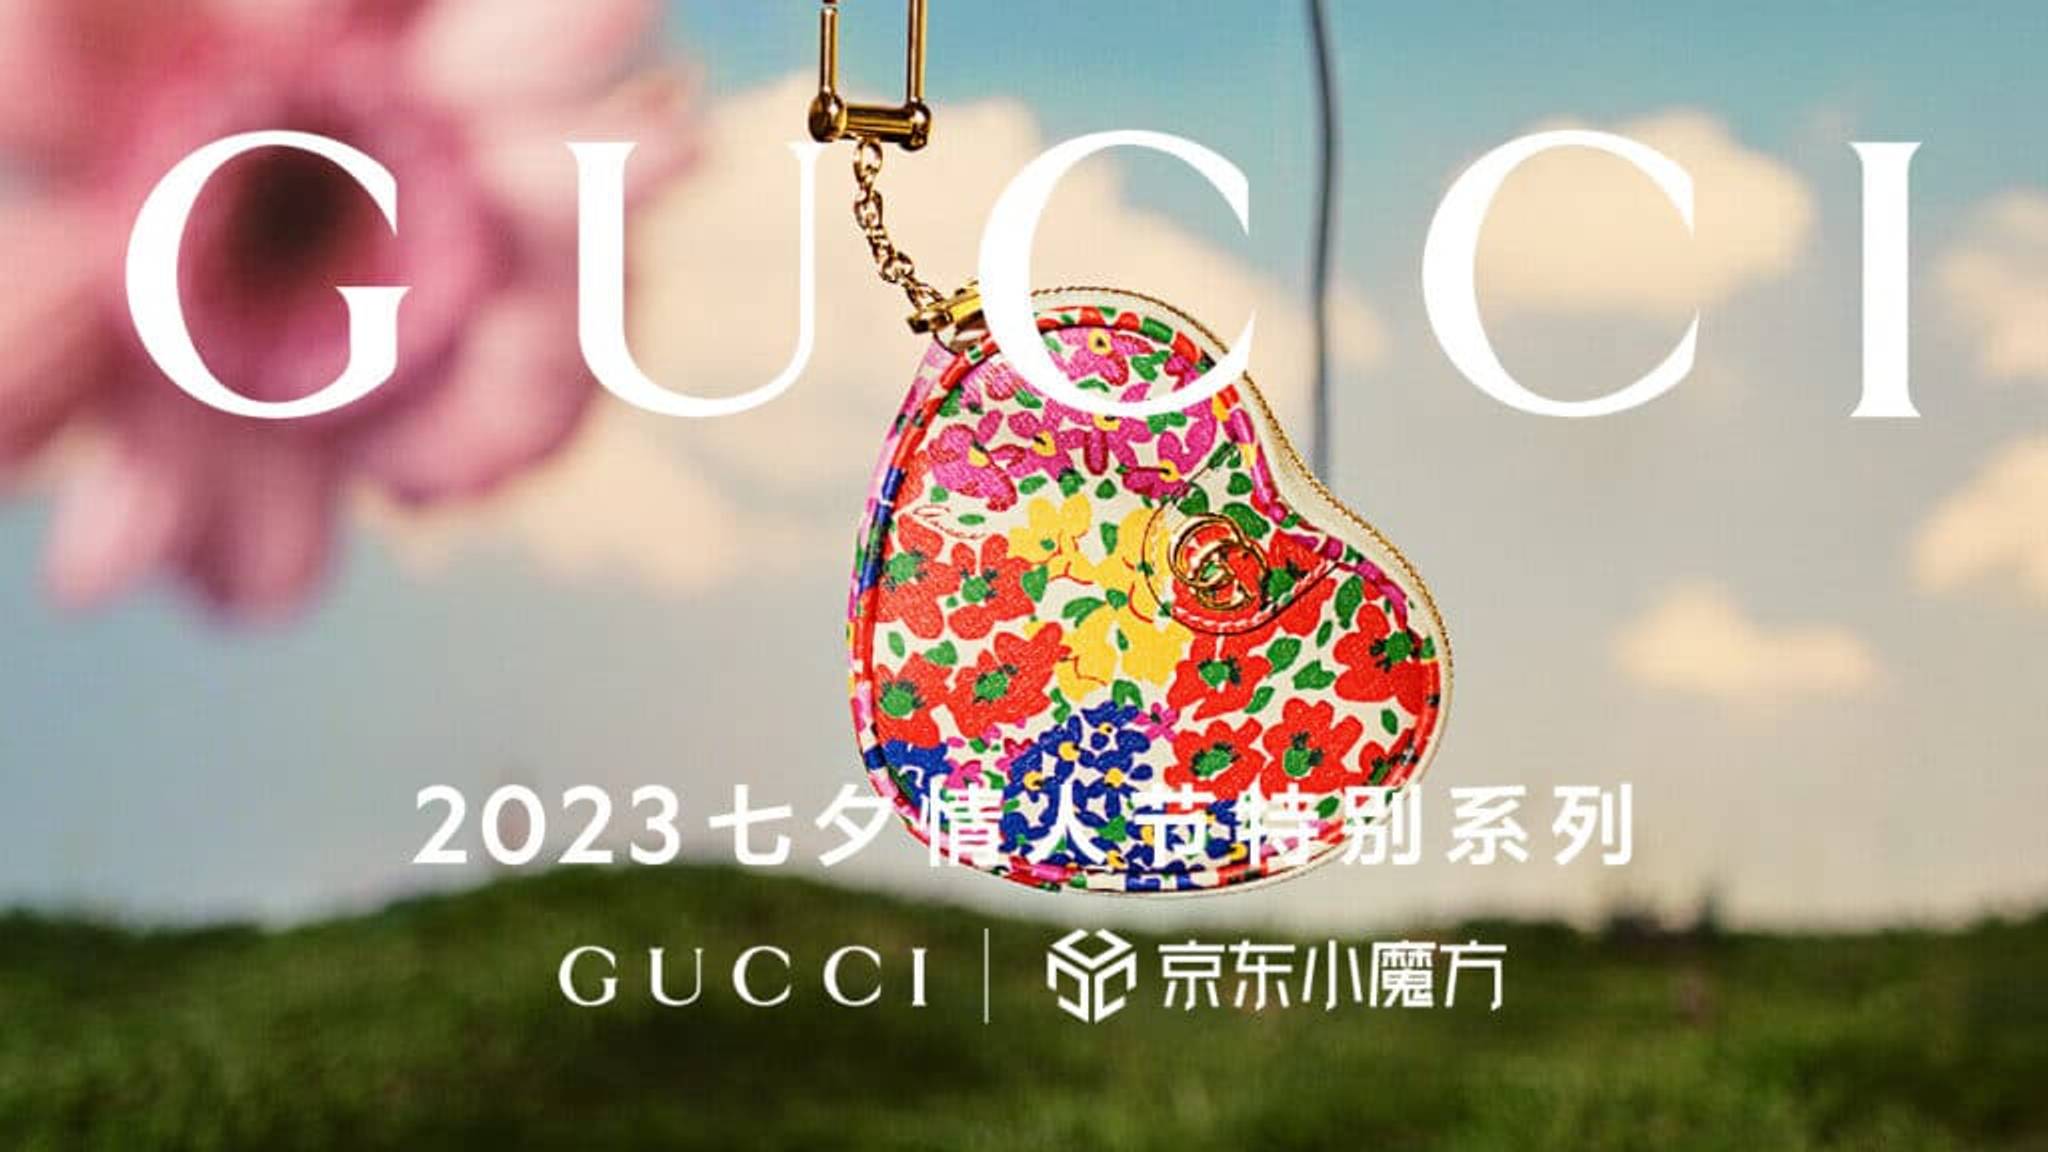 Gucci bolsters online luxury offering in China